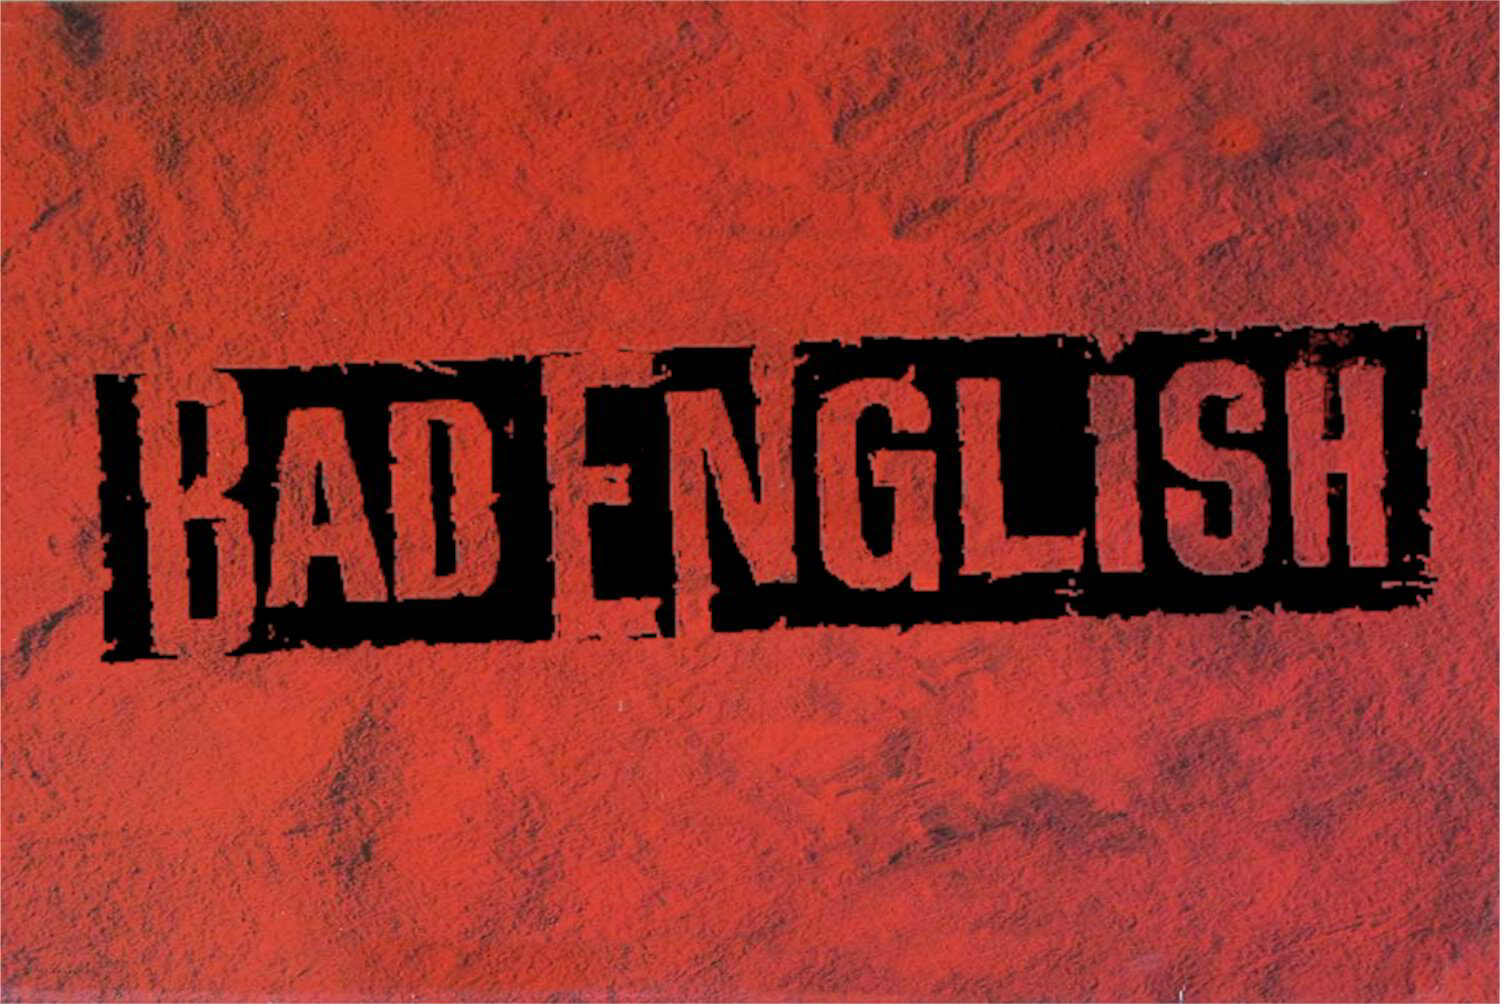 BAD ENGLISH (1989) - TRACK BY TRACK REVIEW